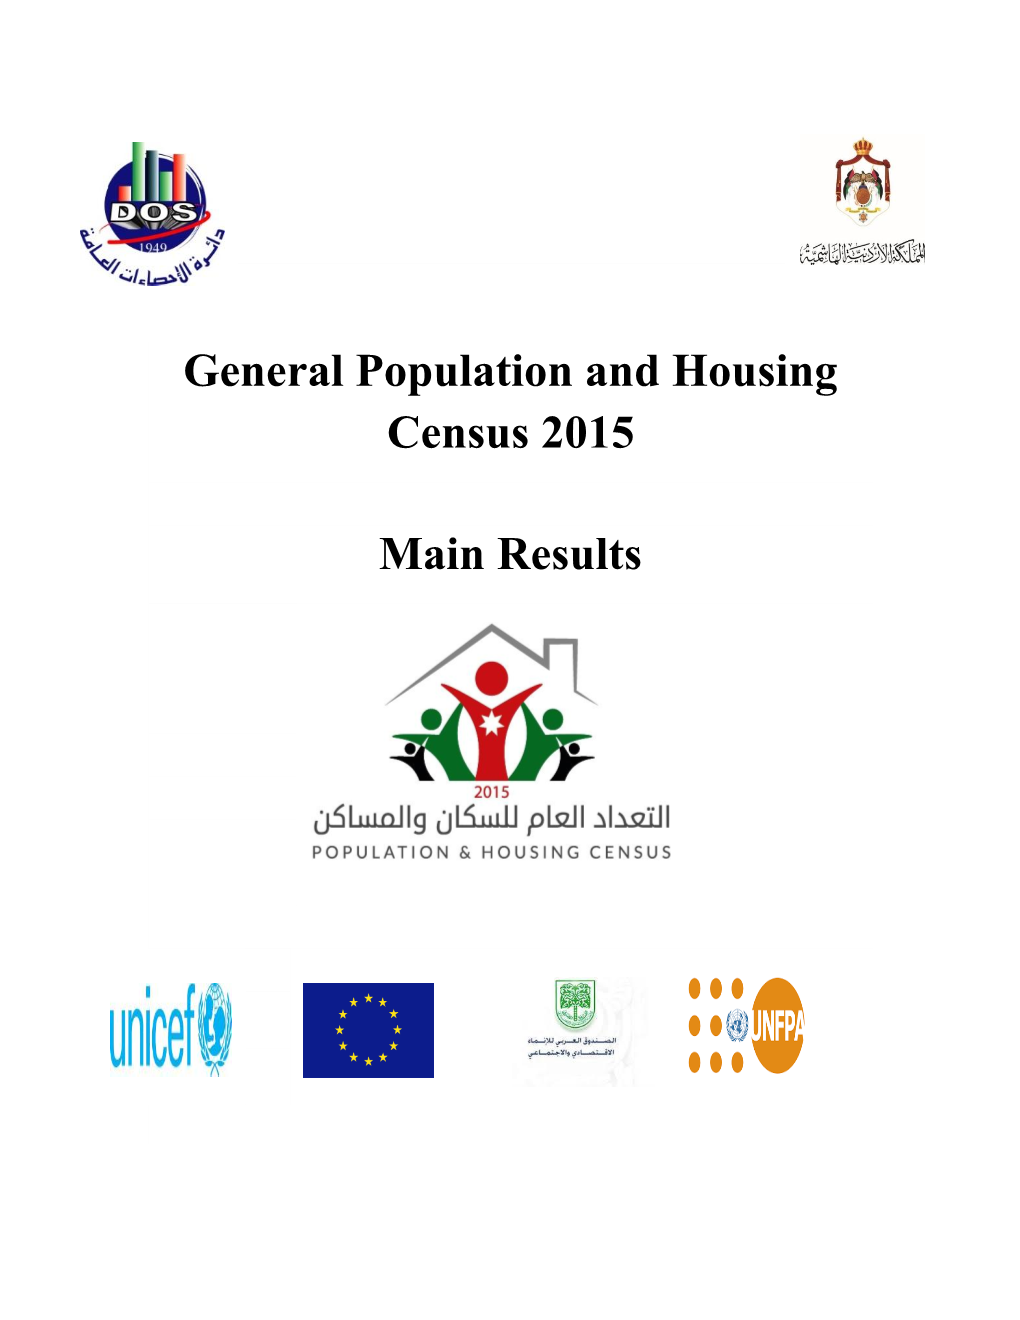 General Population and Housing Census 2015 Main Results